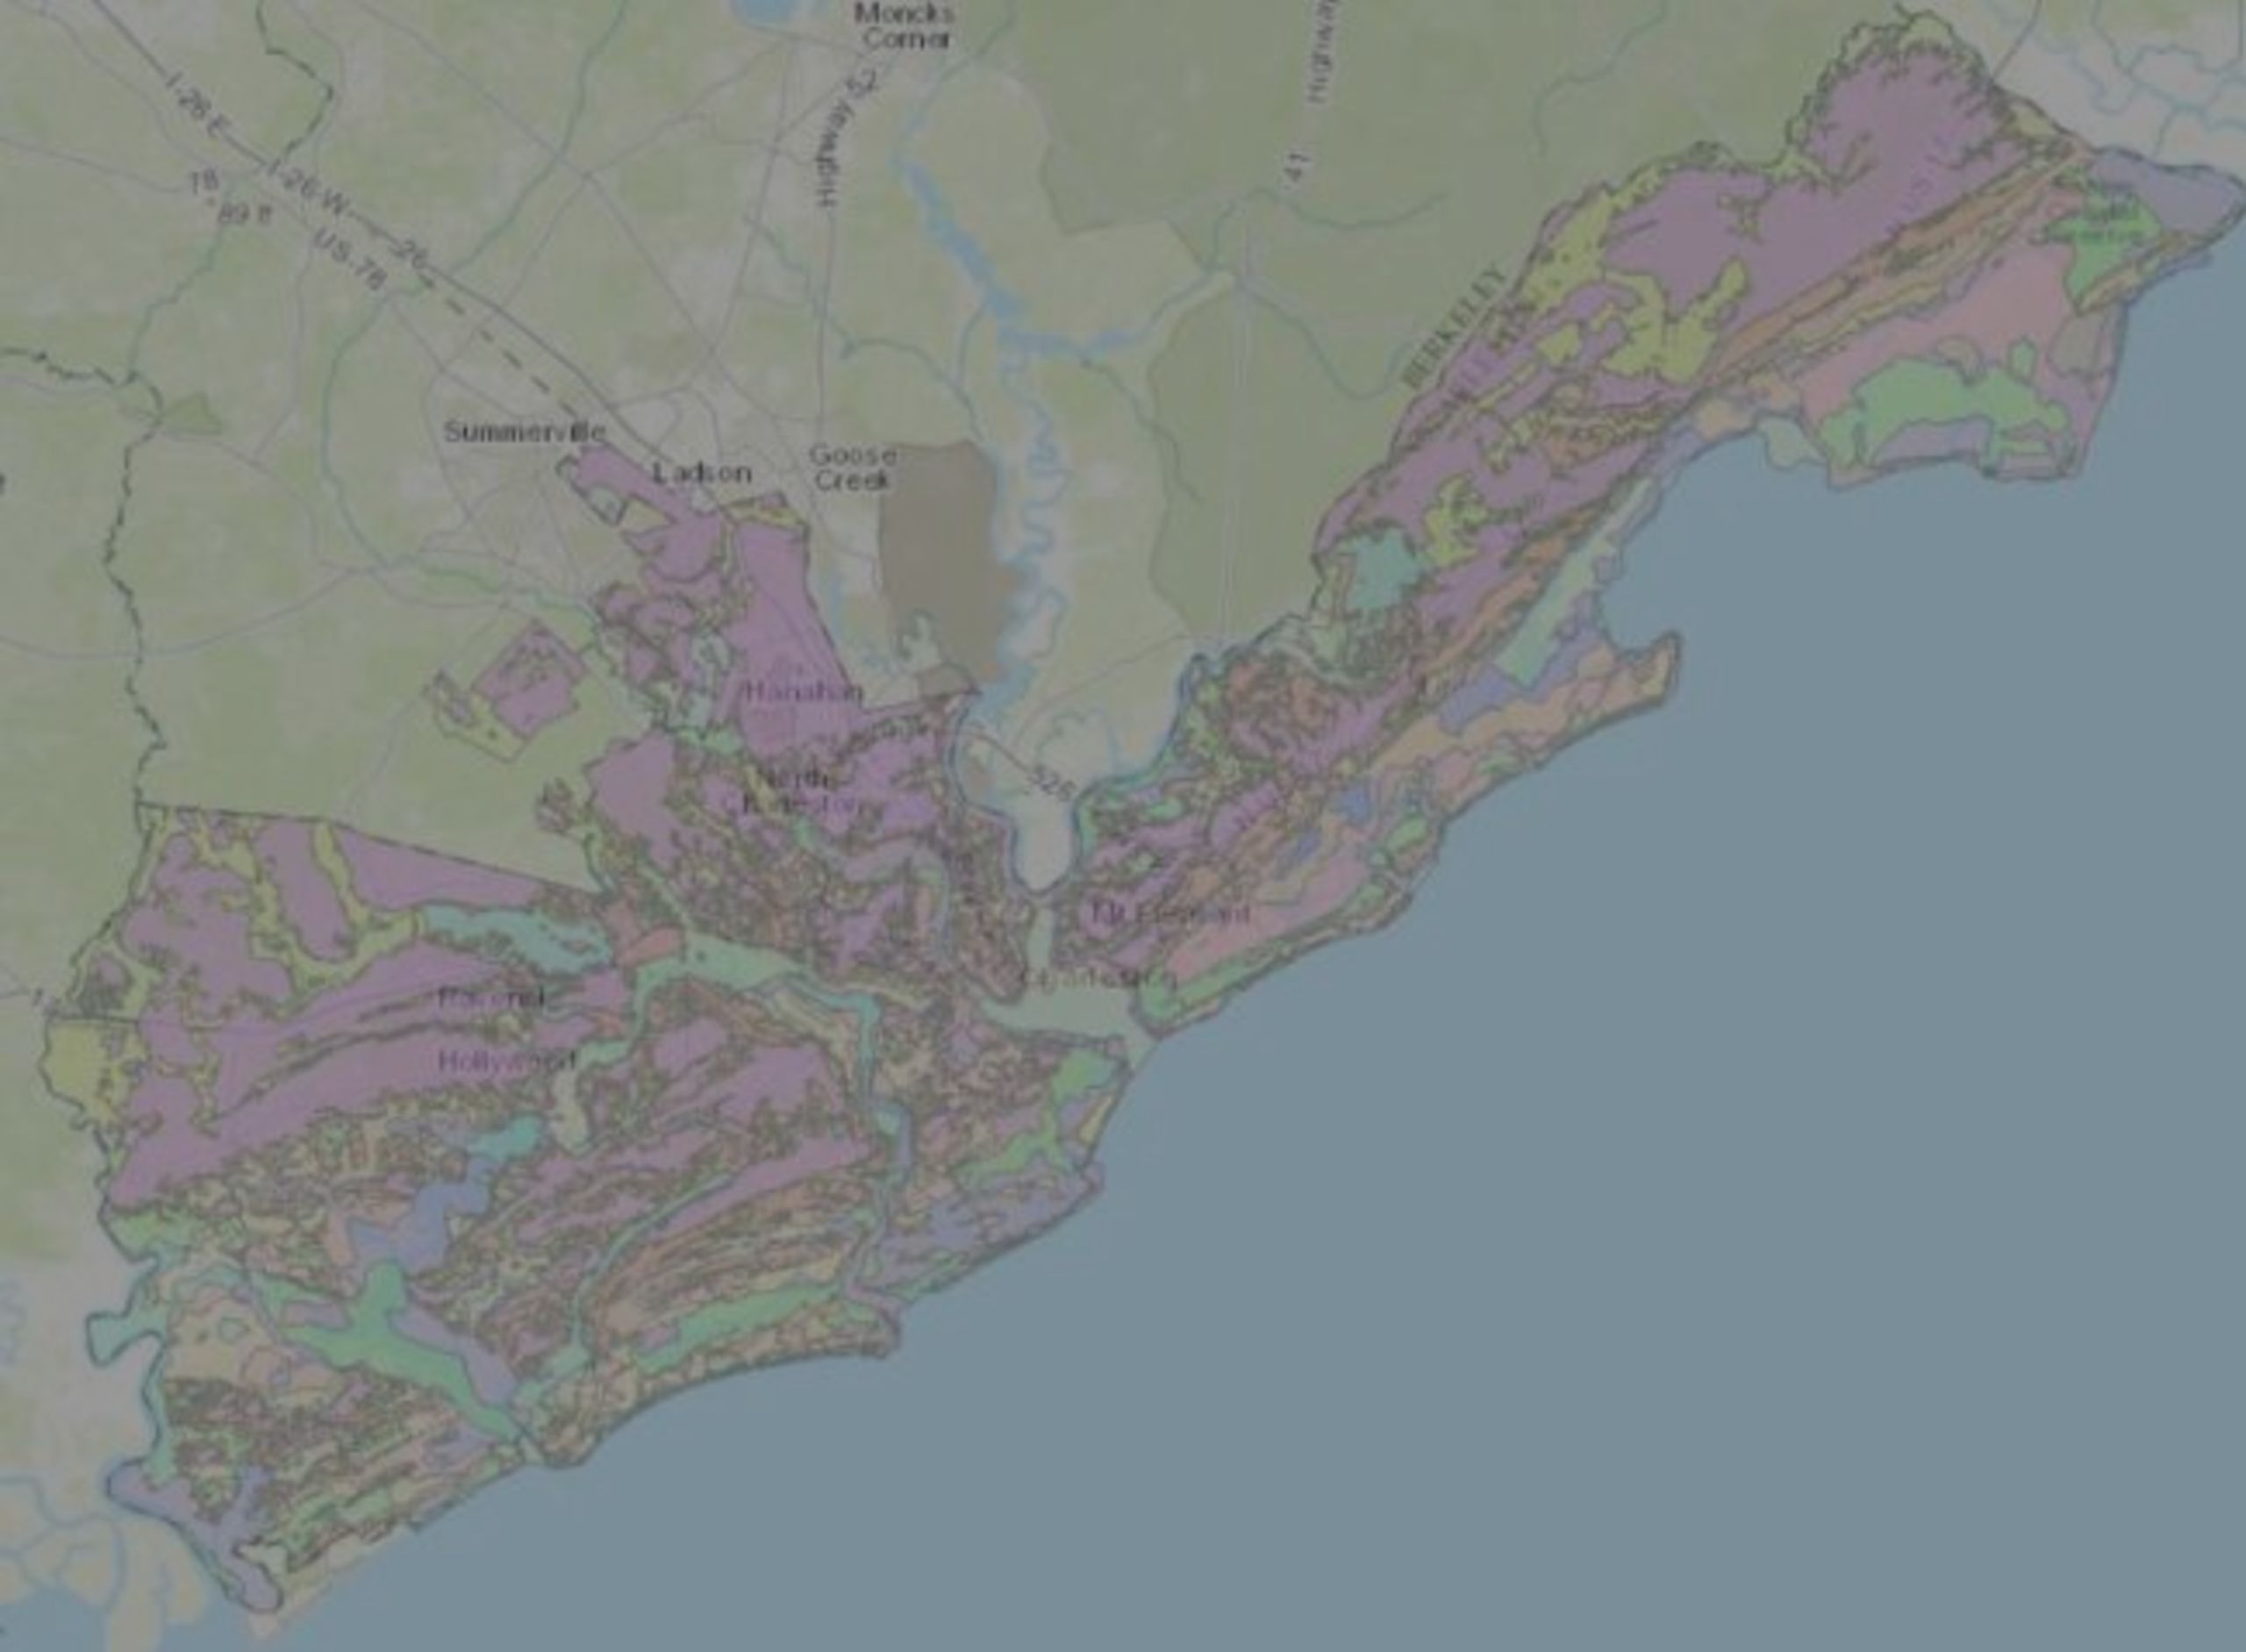 Charleston County Info for Flood Maps &#038; Open Houses